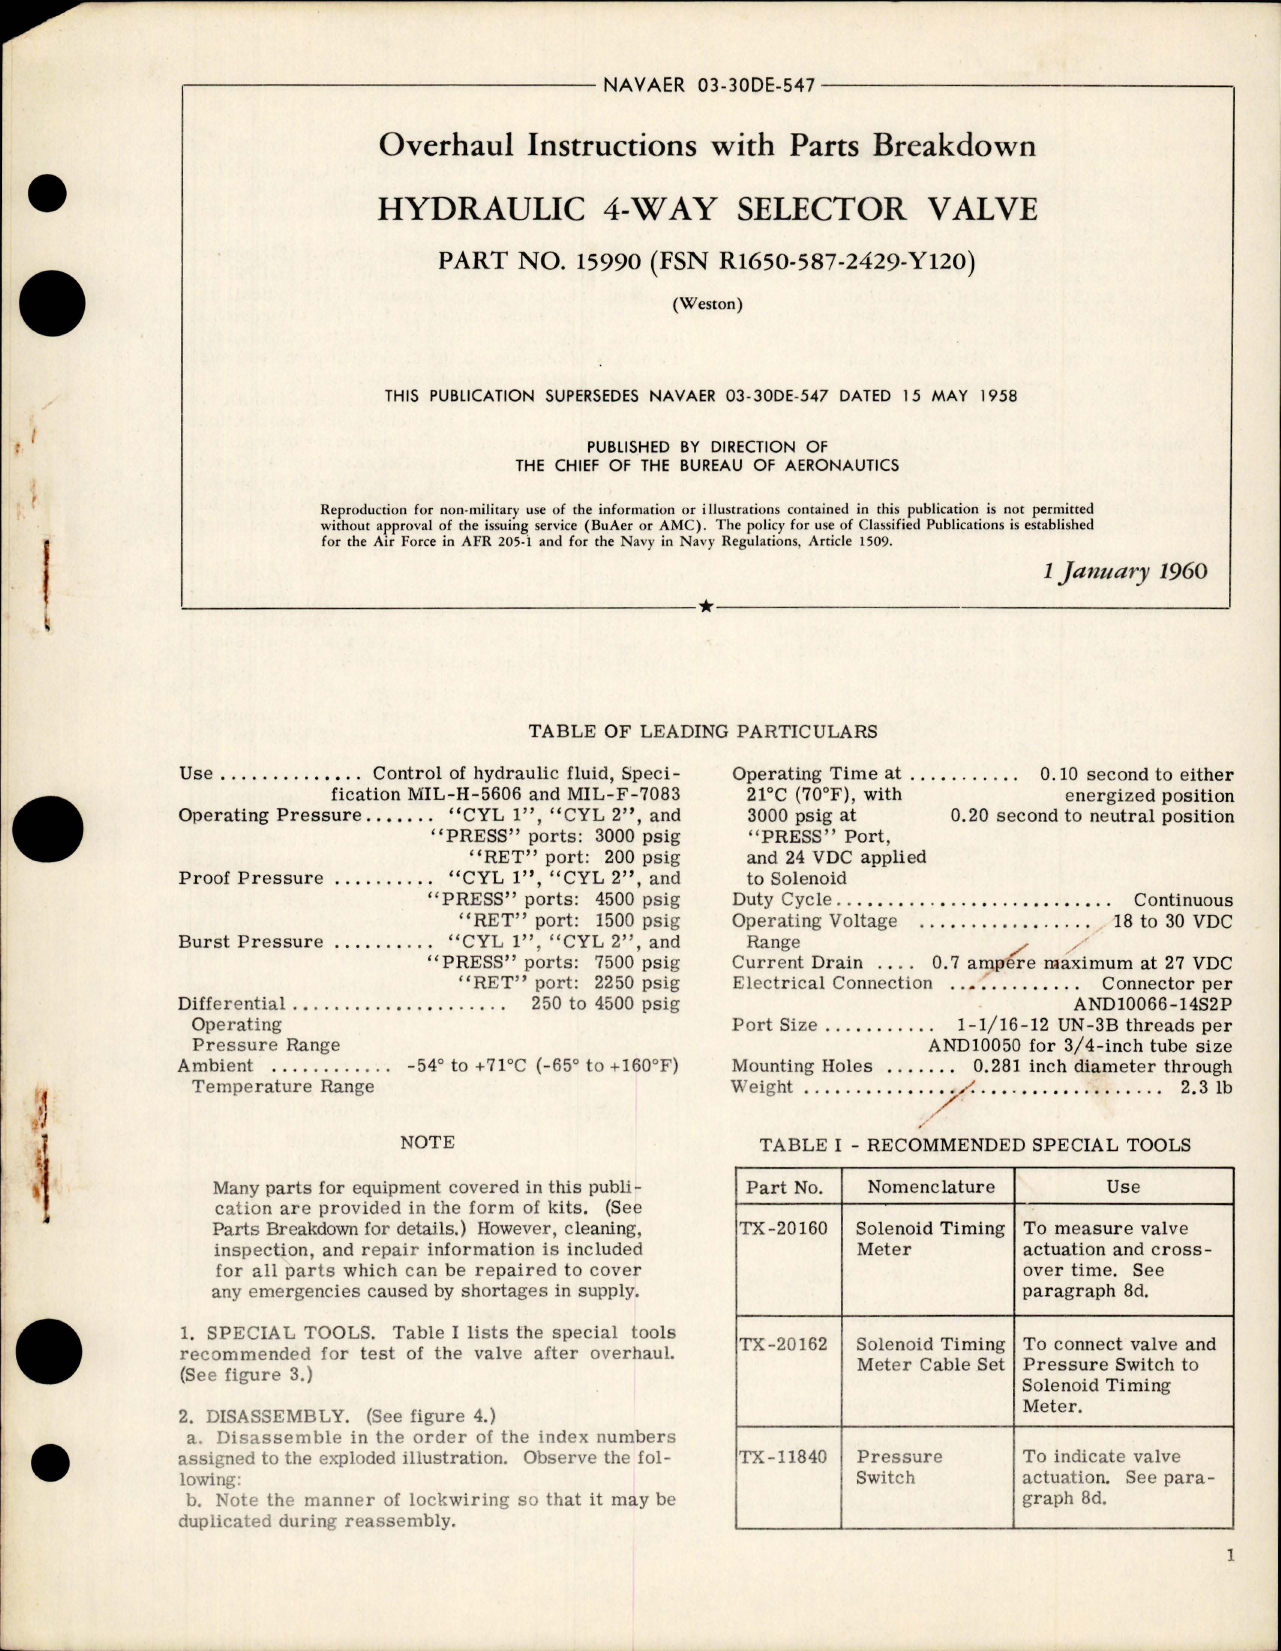 Sample page 1 from AirCorps Library document: Overhaul Instructions with Parts Breakdown for Hydraulic 4Way Selector Valve - Part 15990